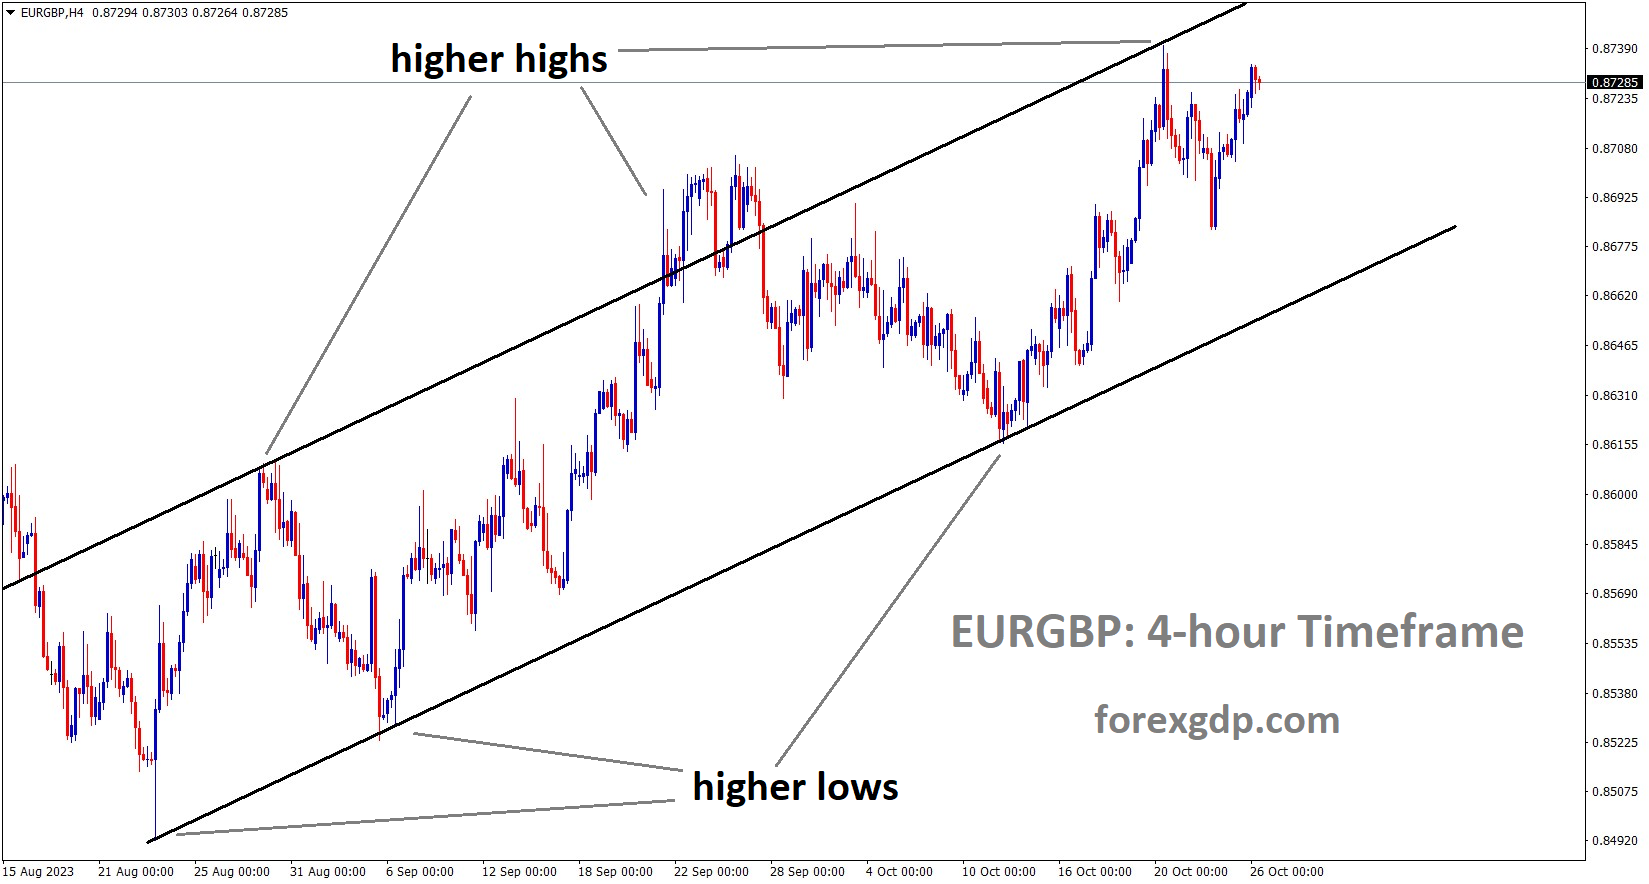 EURGBP is moving in an Ascending channel and the market has reached the higher high area of the channel